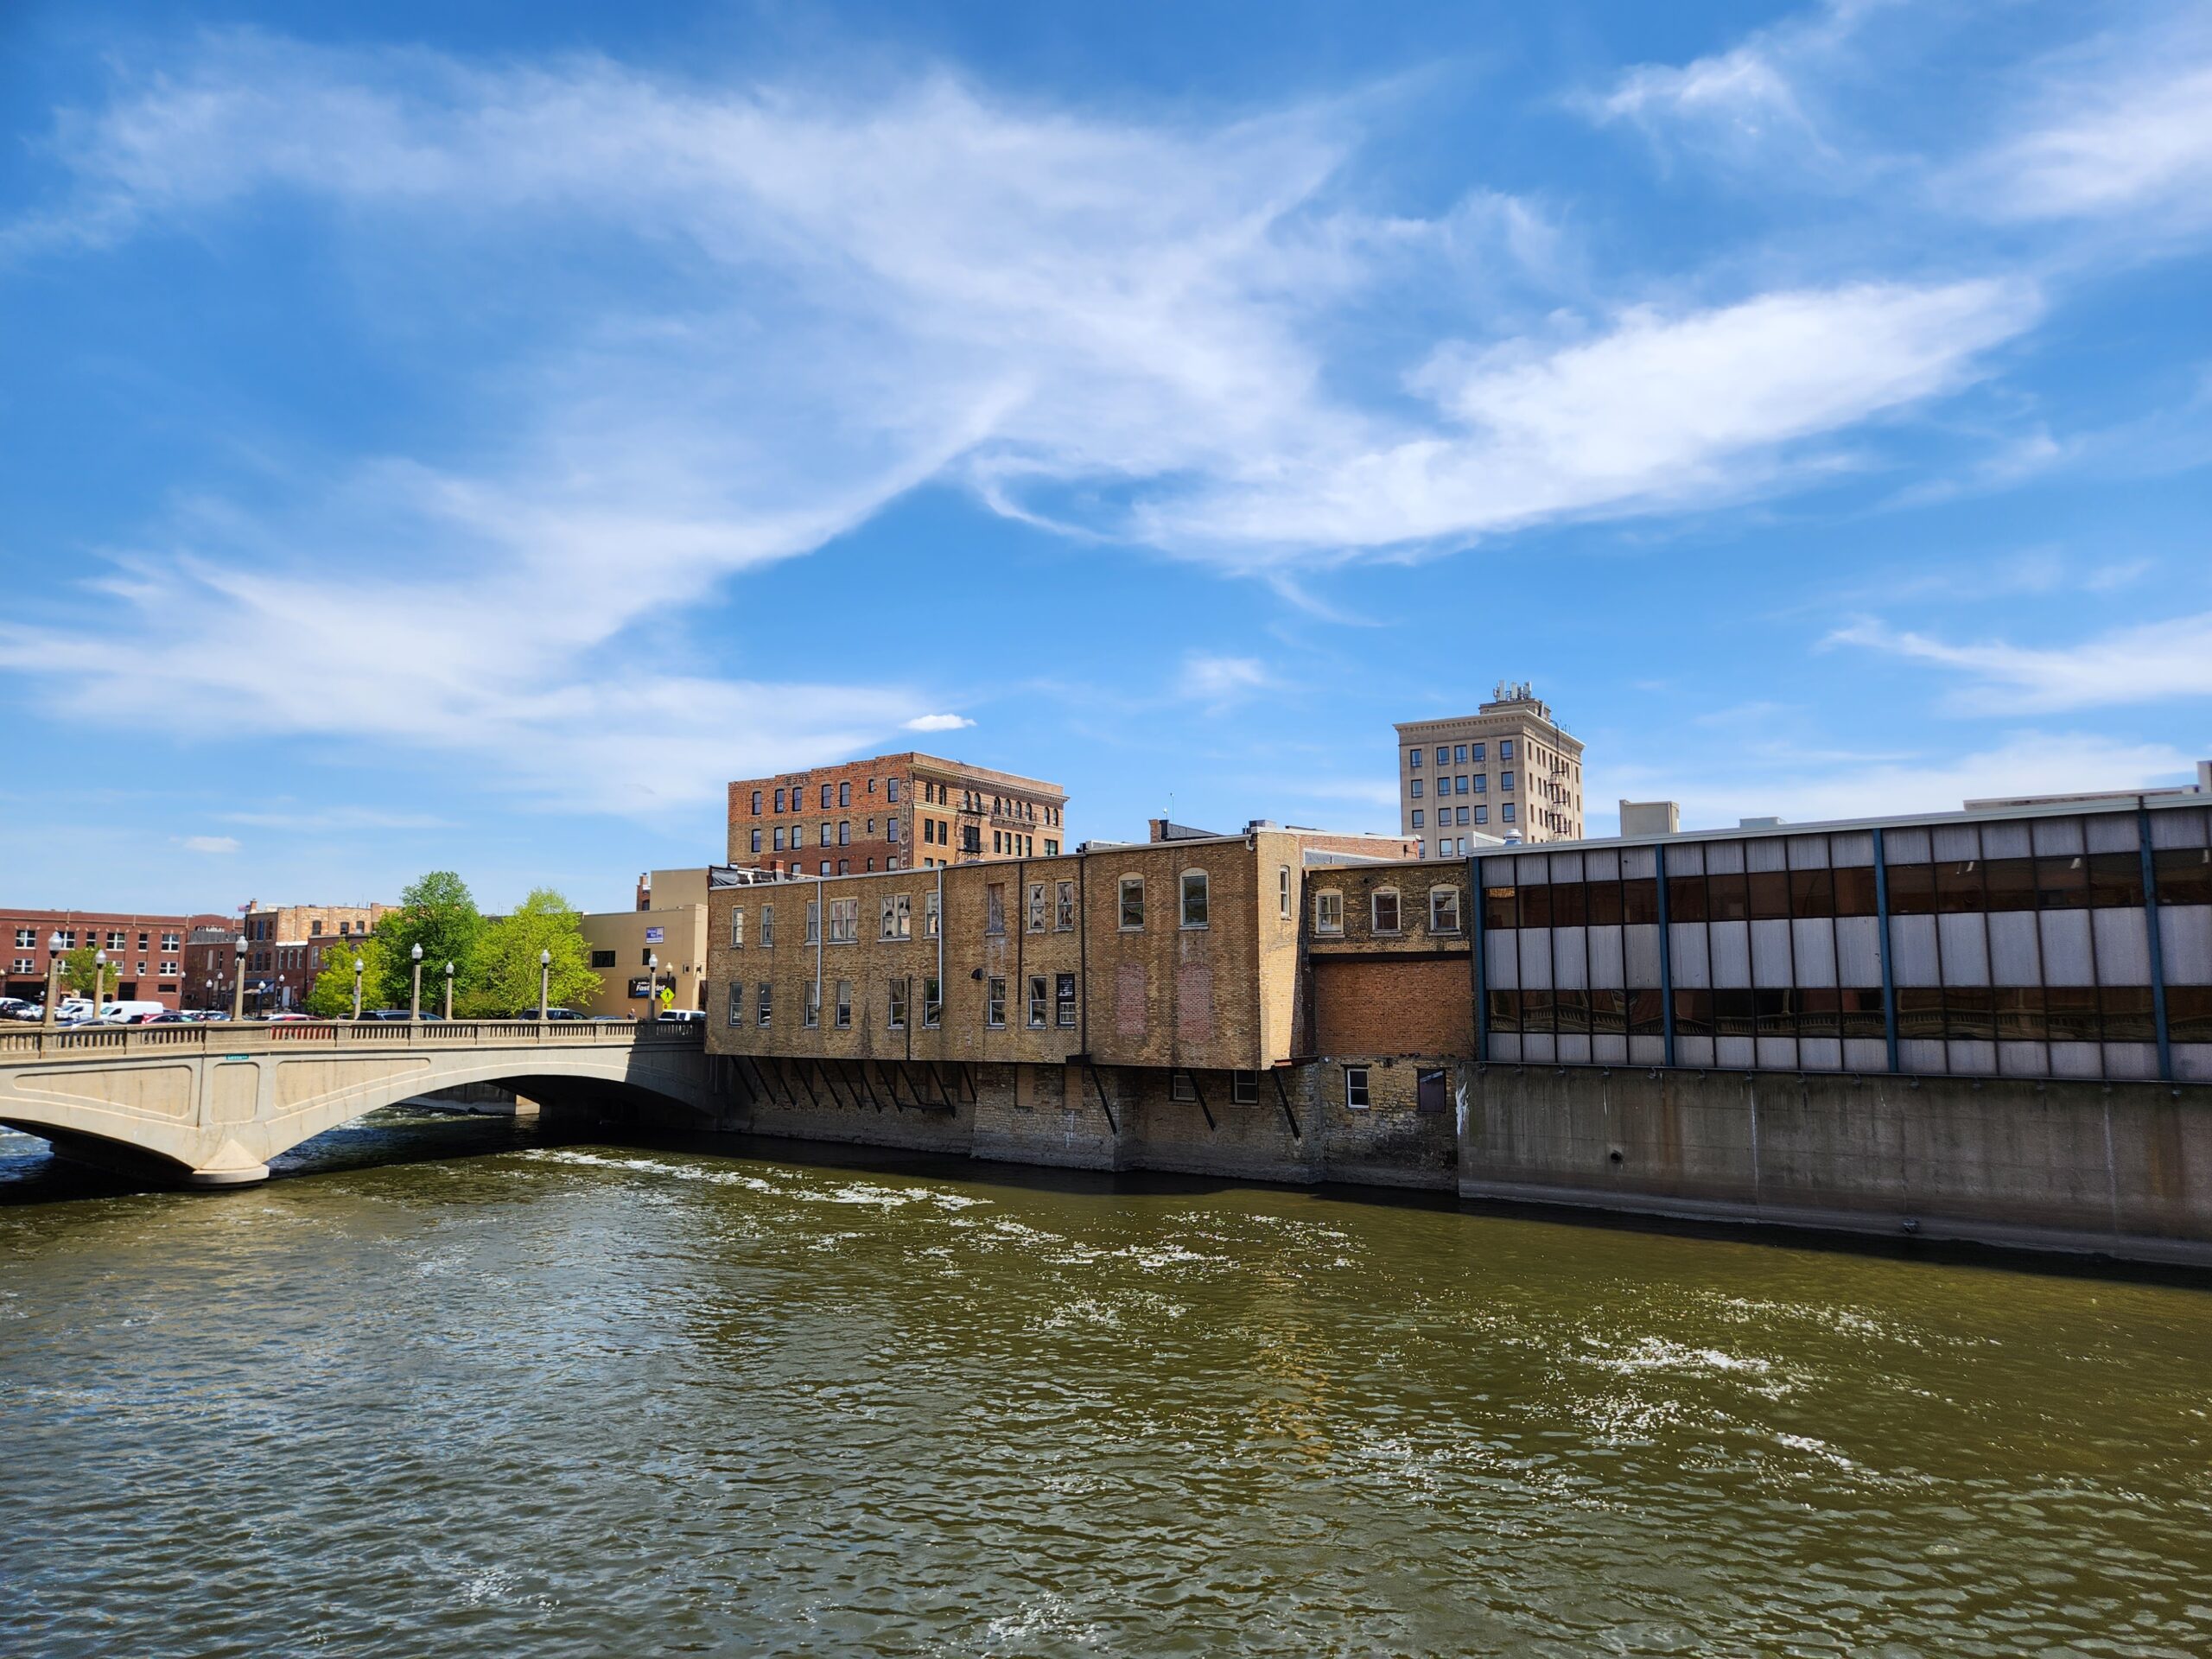 A brick building cantilevered over the Fox River. View is from across the river.